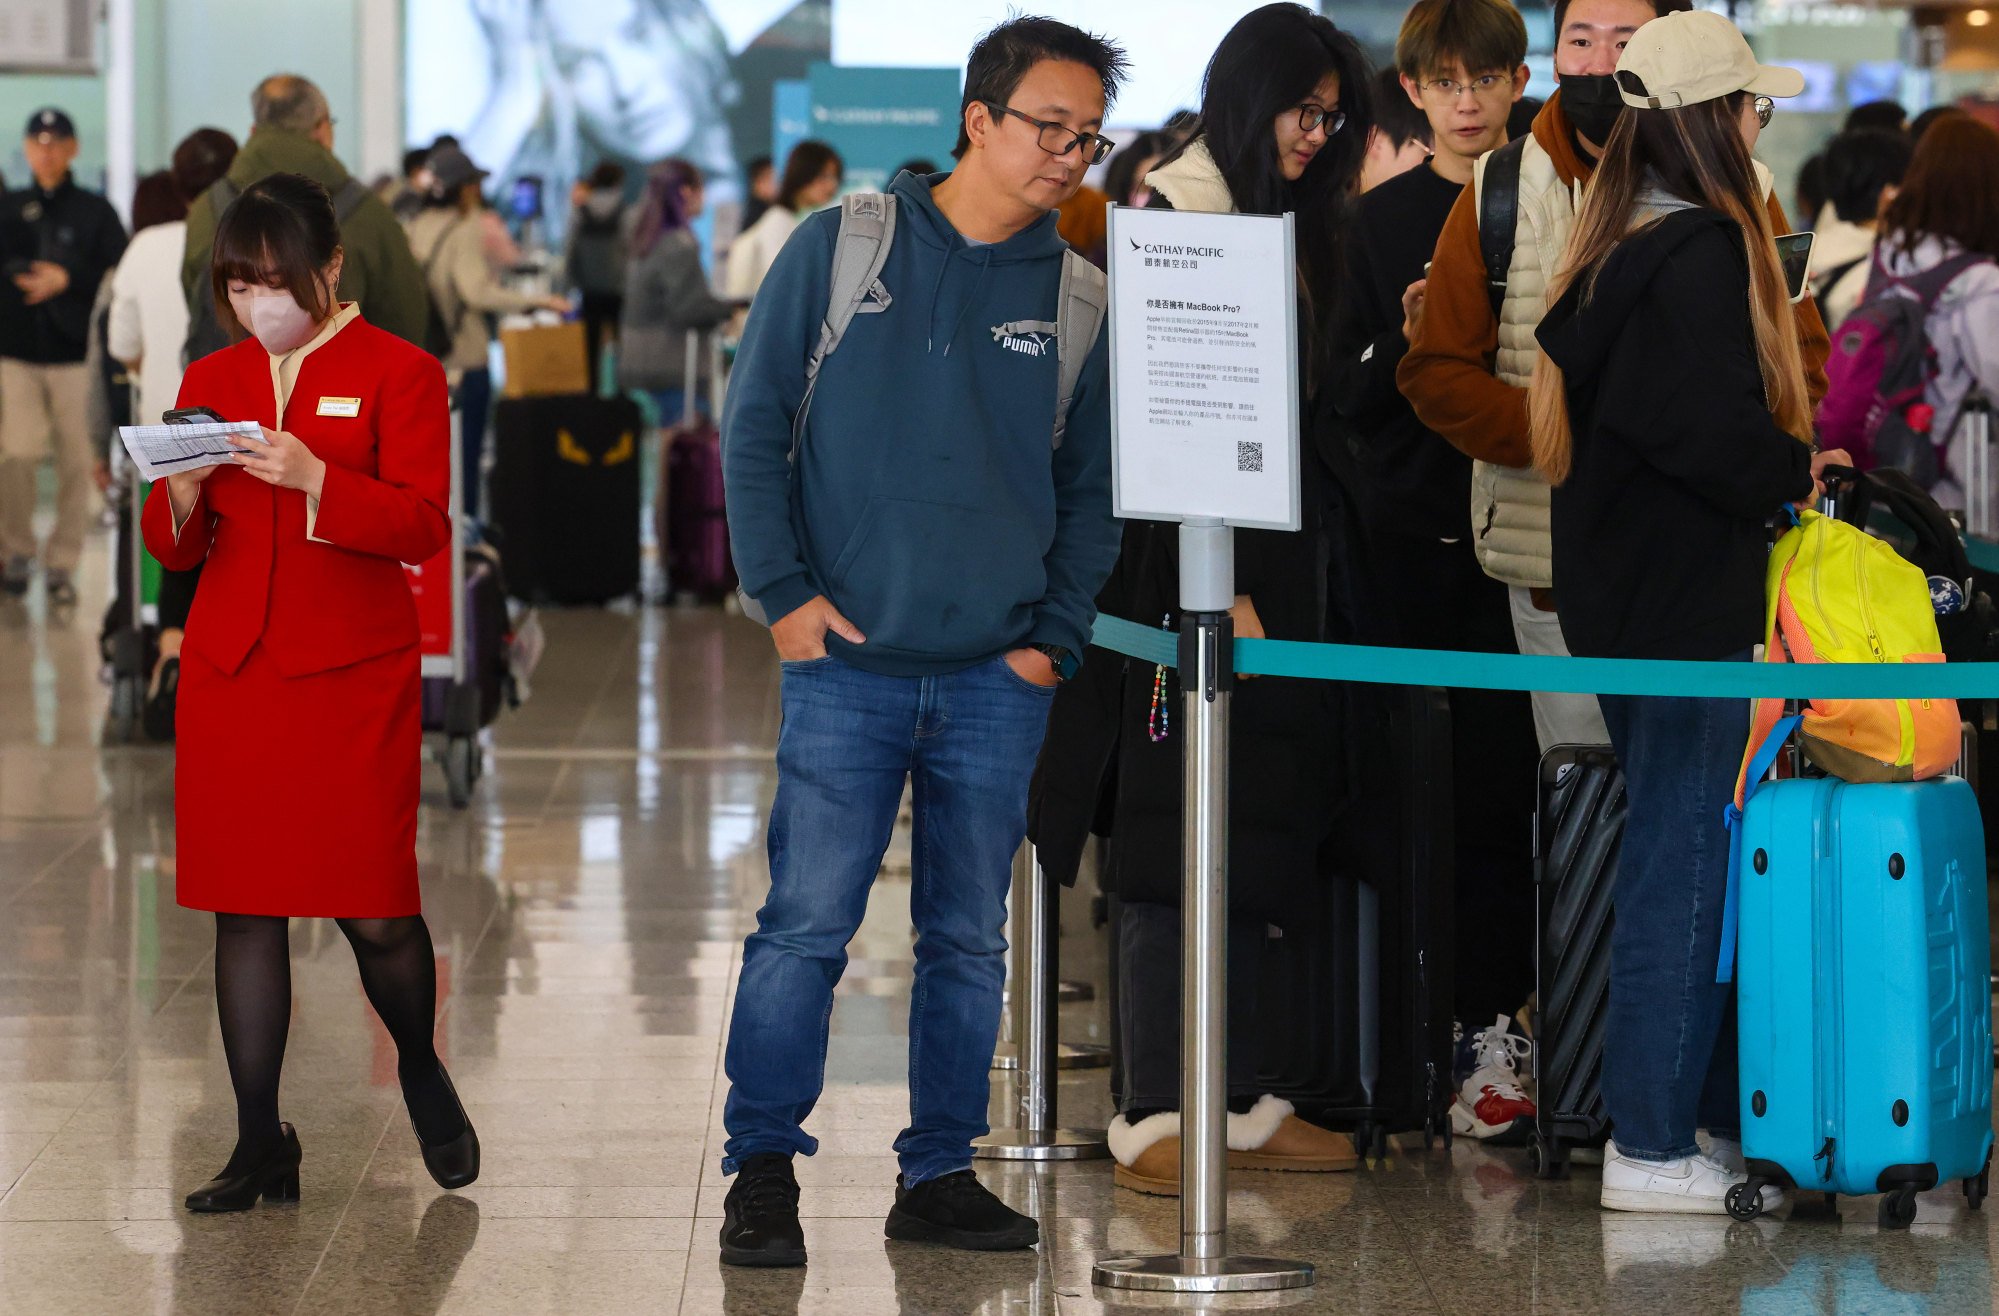 Cathay has cancelled more than 160 flights since Christmas Eve, most of them during the final week of December and in the first few days of January. Photo: Dickson Lee